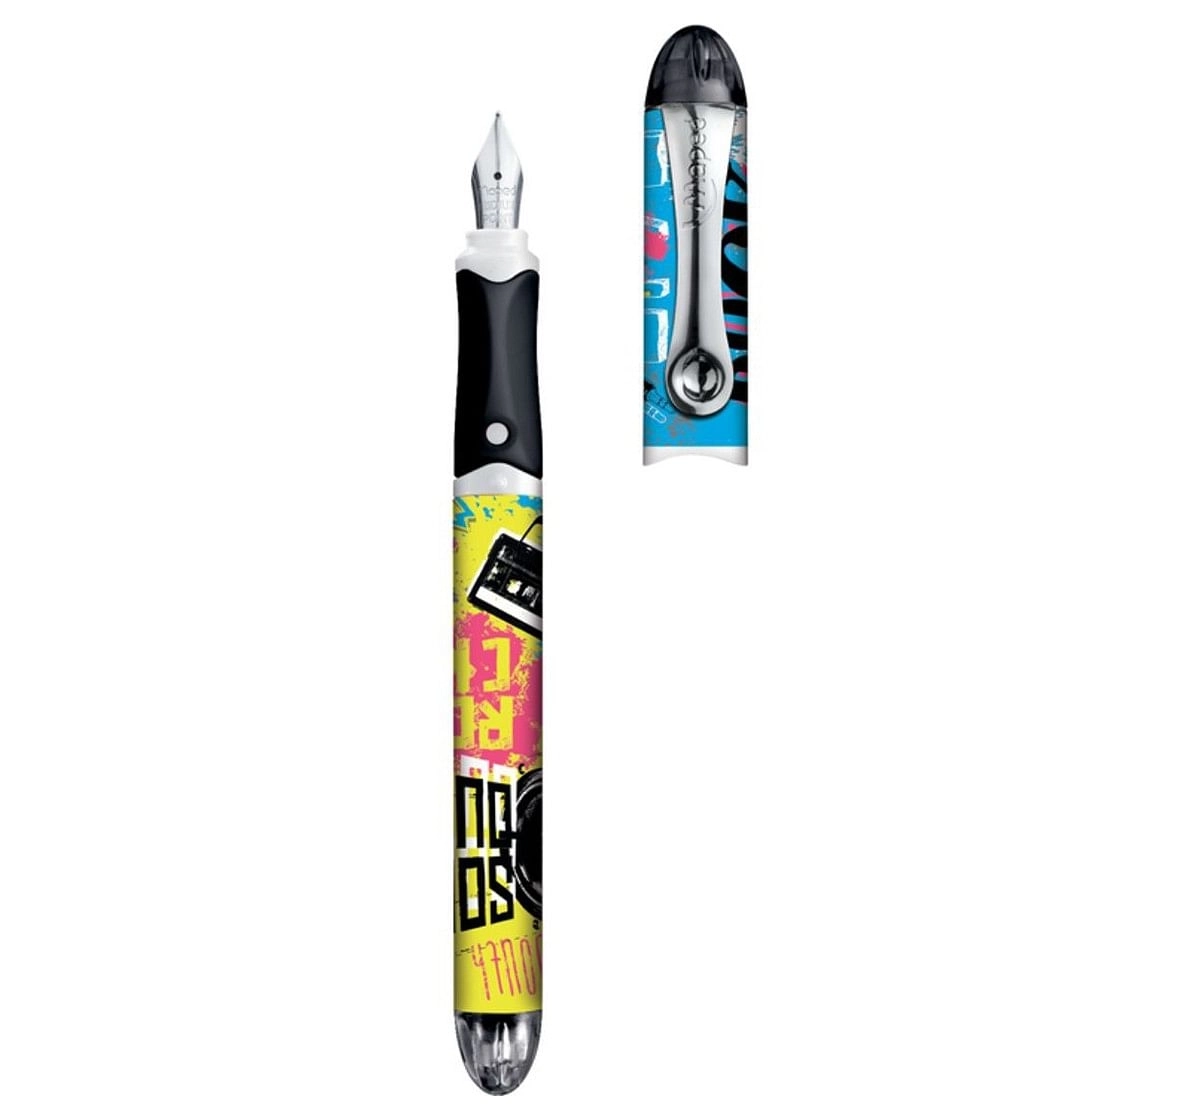 Maped Fountain Pen Teenager Blister, 7Y+ (Multicolour)